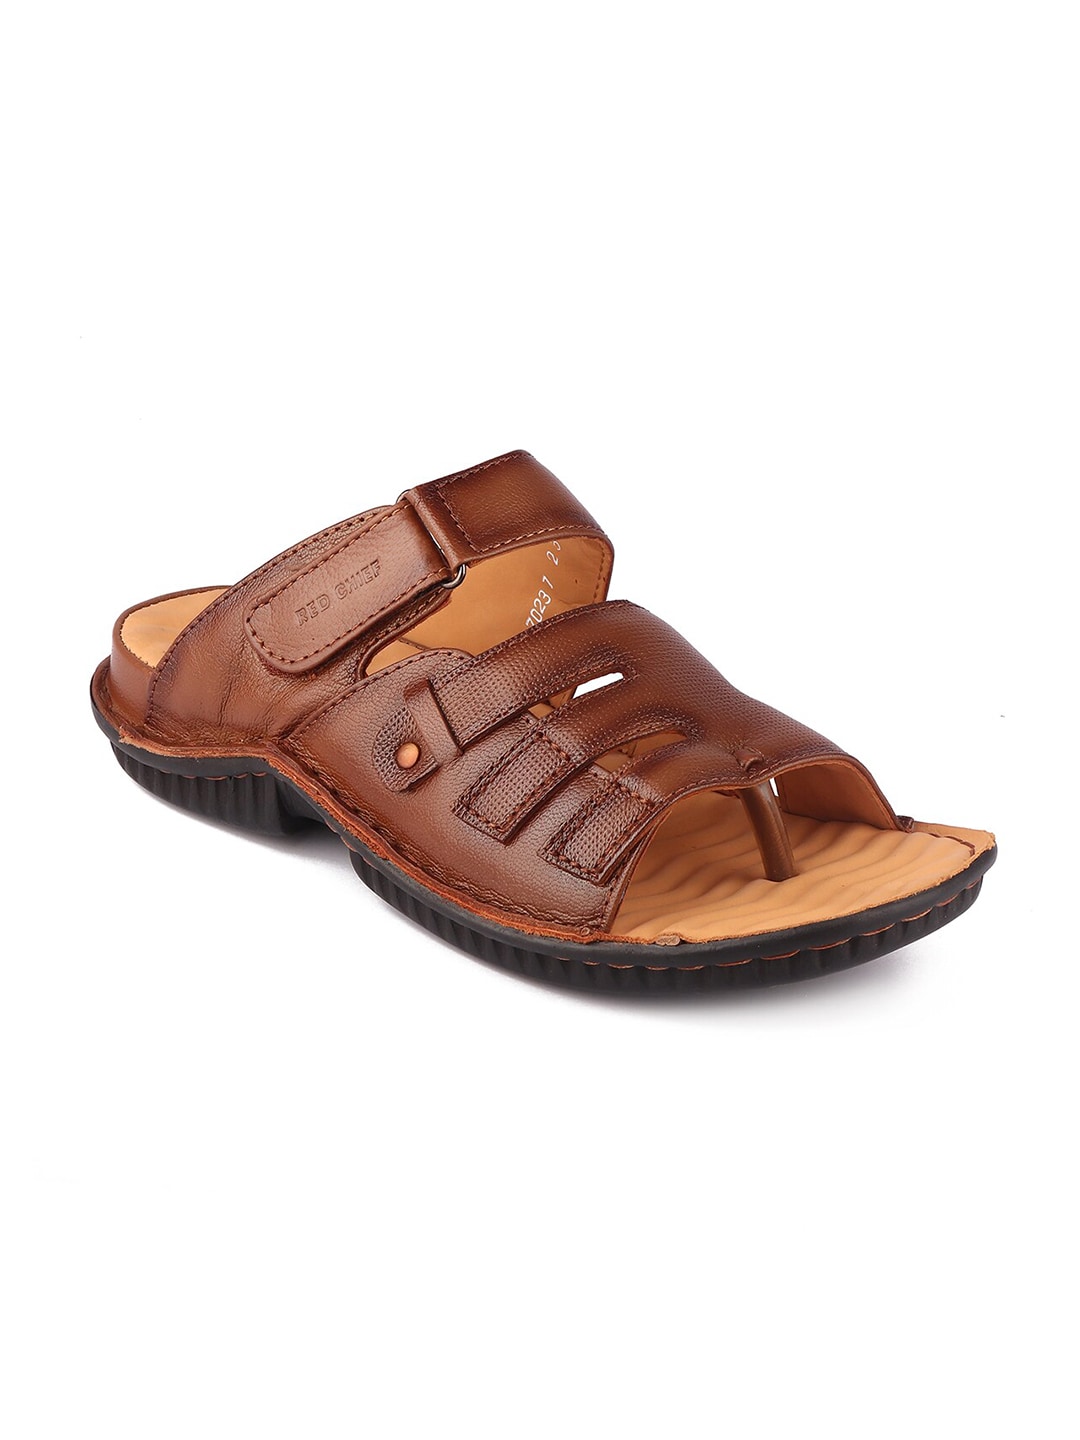 Red Chief Men Tan Brown Leather Comfort Sandals